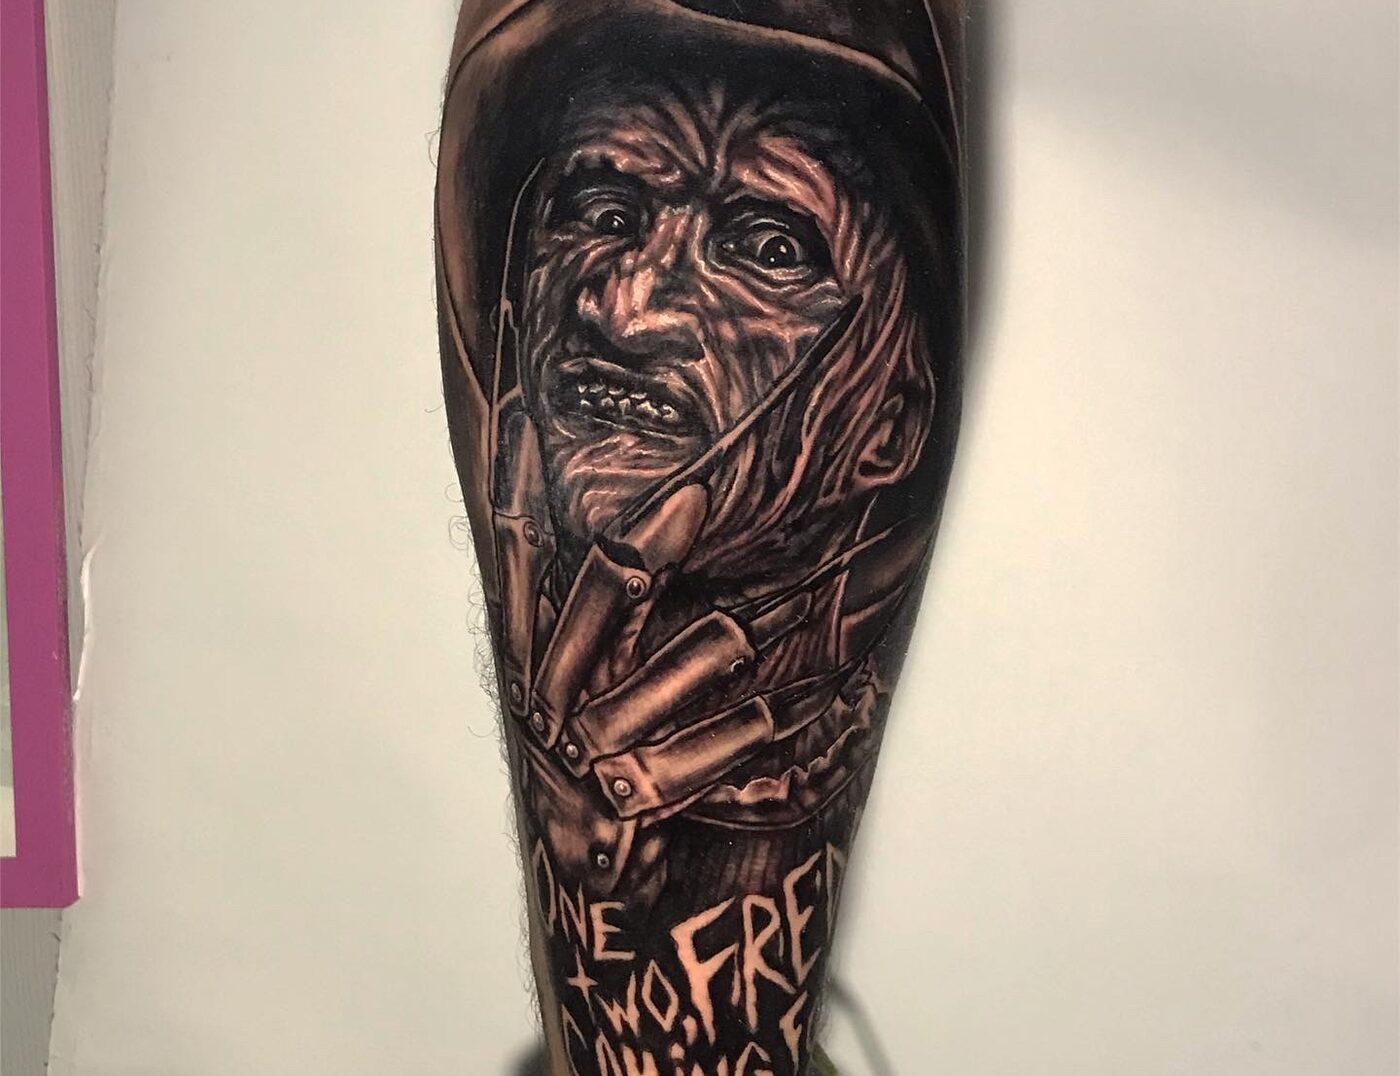 Freddy Kreuger "A Nightmare on Elm Street" Tattoo By Rene Cristobal at Iron Palm Tattoos. Rene is a Spanish speaking international tattoo artist from Concepcion, Chile. He specializes in solid blackwork tattoos and photo realism. Iron Palm is Atlanta's only late night tattoo shop. We're open from 1PM - 2AM most nights. Walk-ins are welcome.